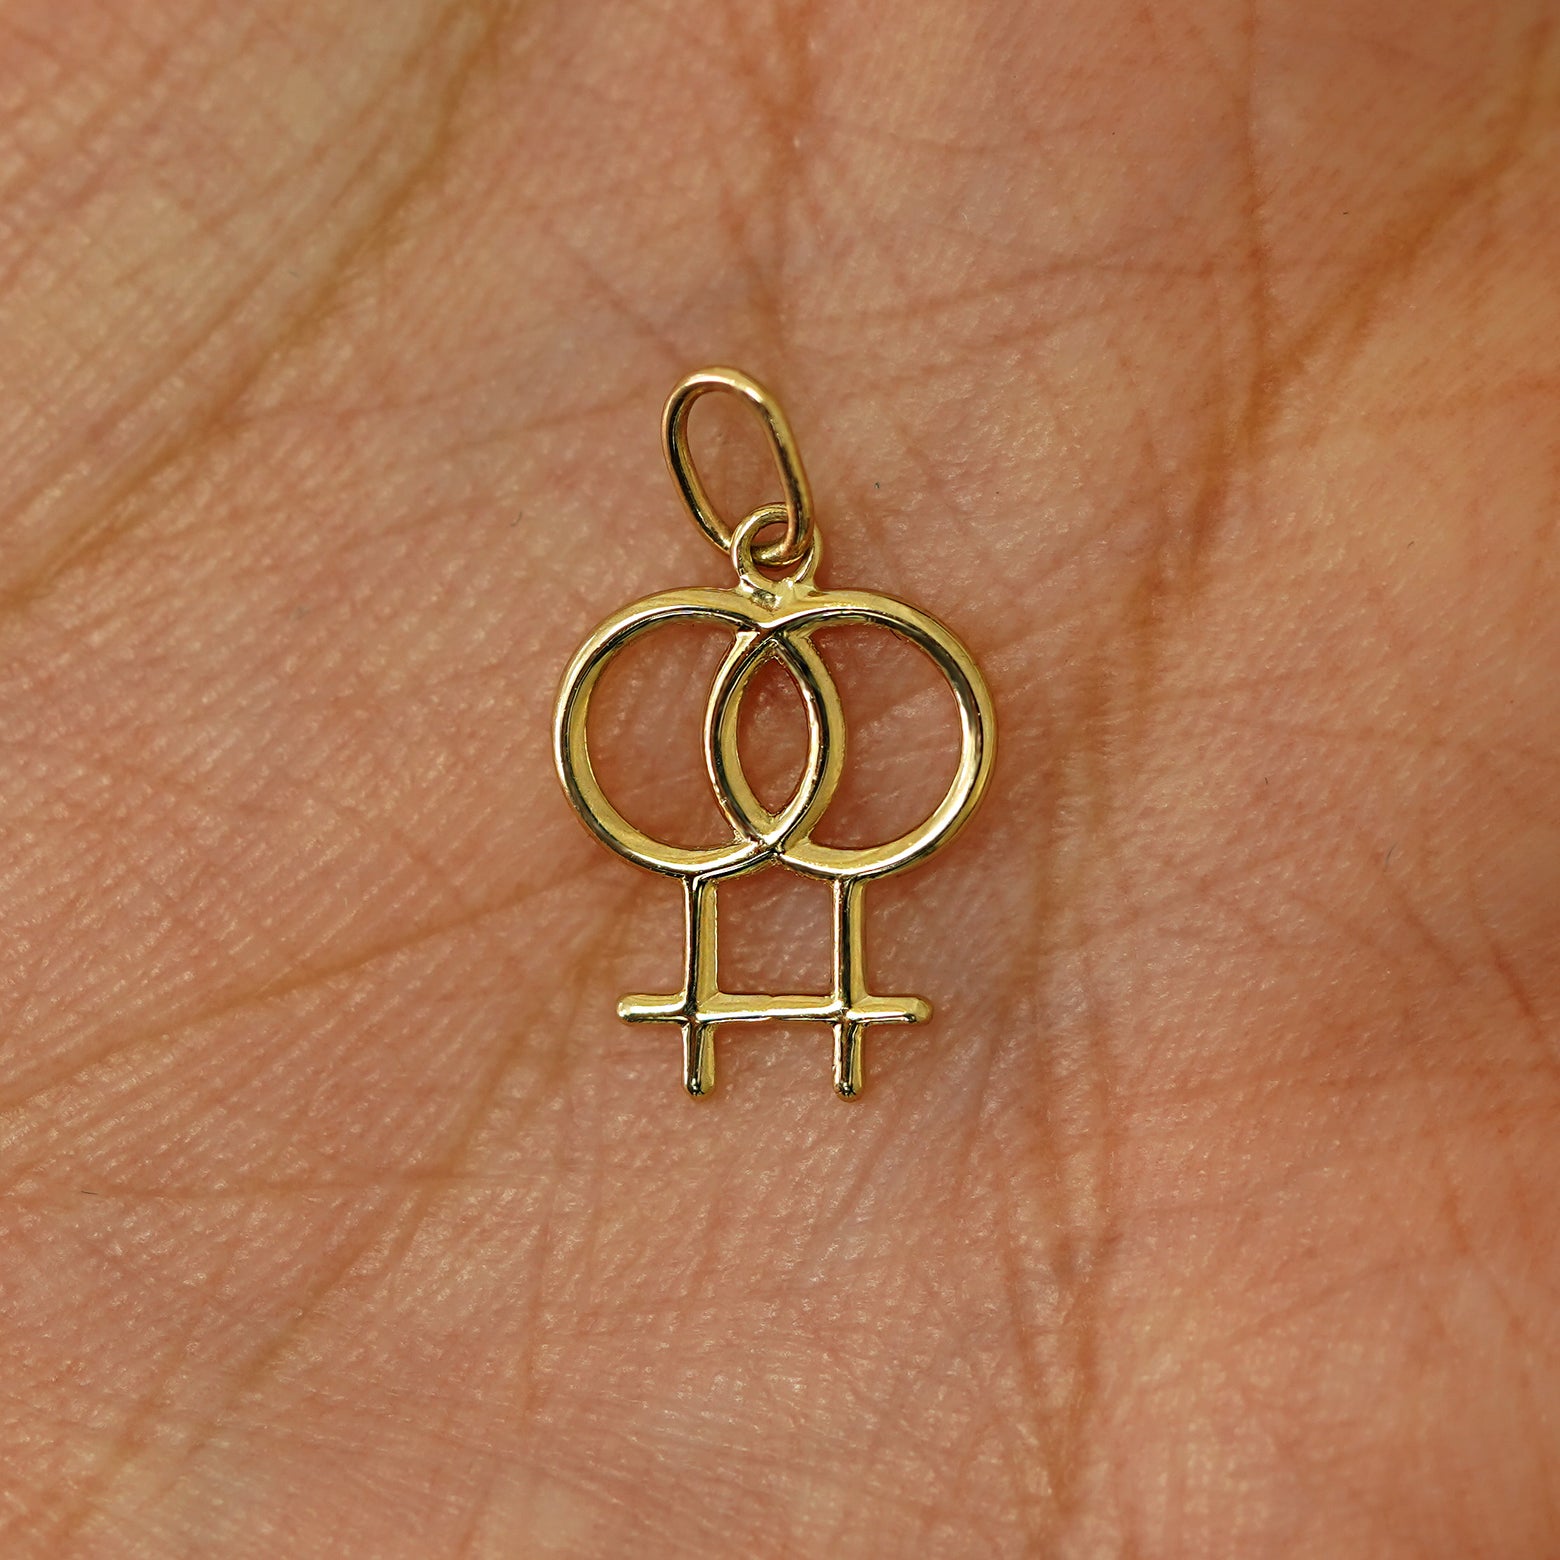 A solid gold Lesbian Symbol Charm for chain resting in a model's palm